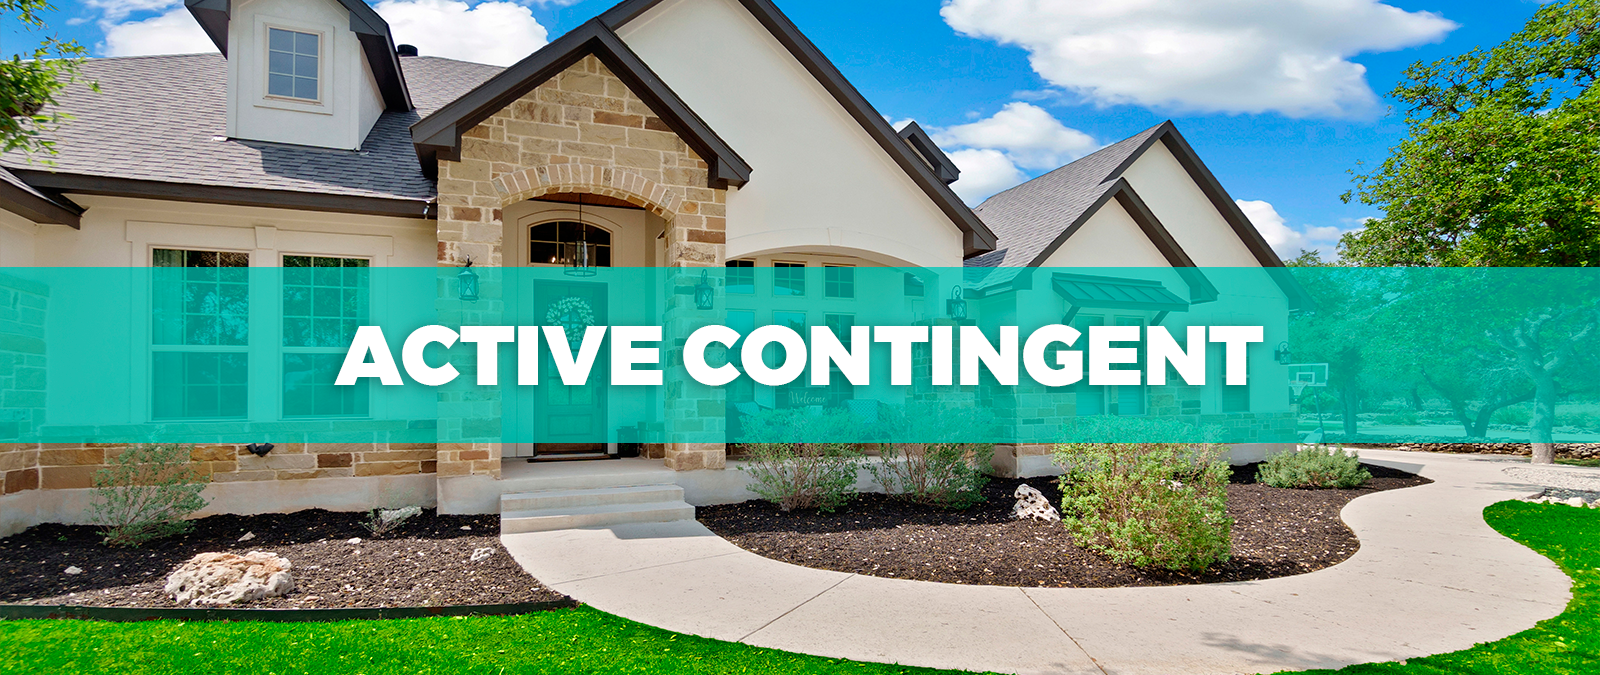 Demystifying "Active Contingent" Status in Real Estate: Pilgrims Mortgage Guide